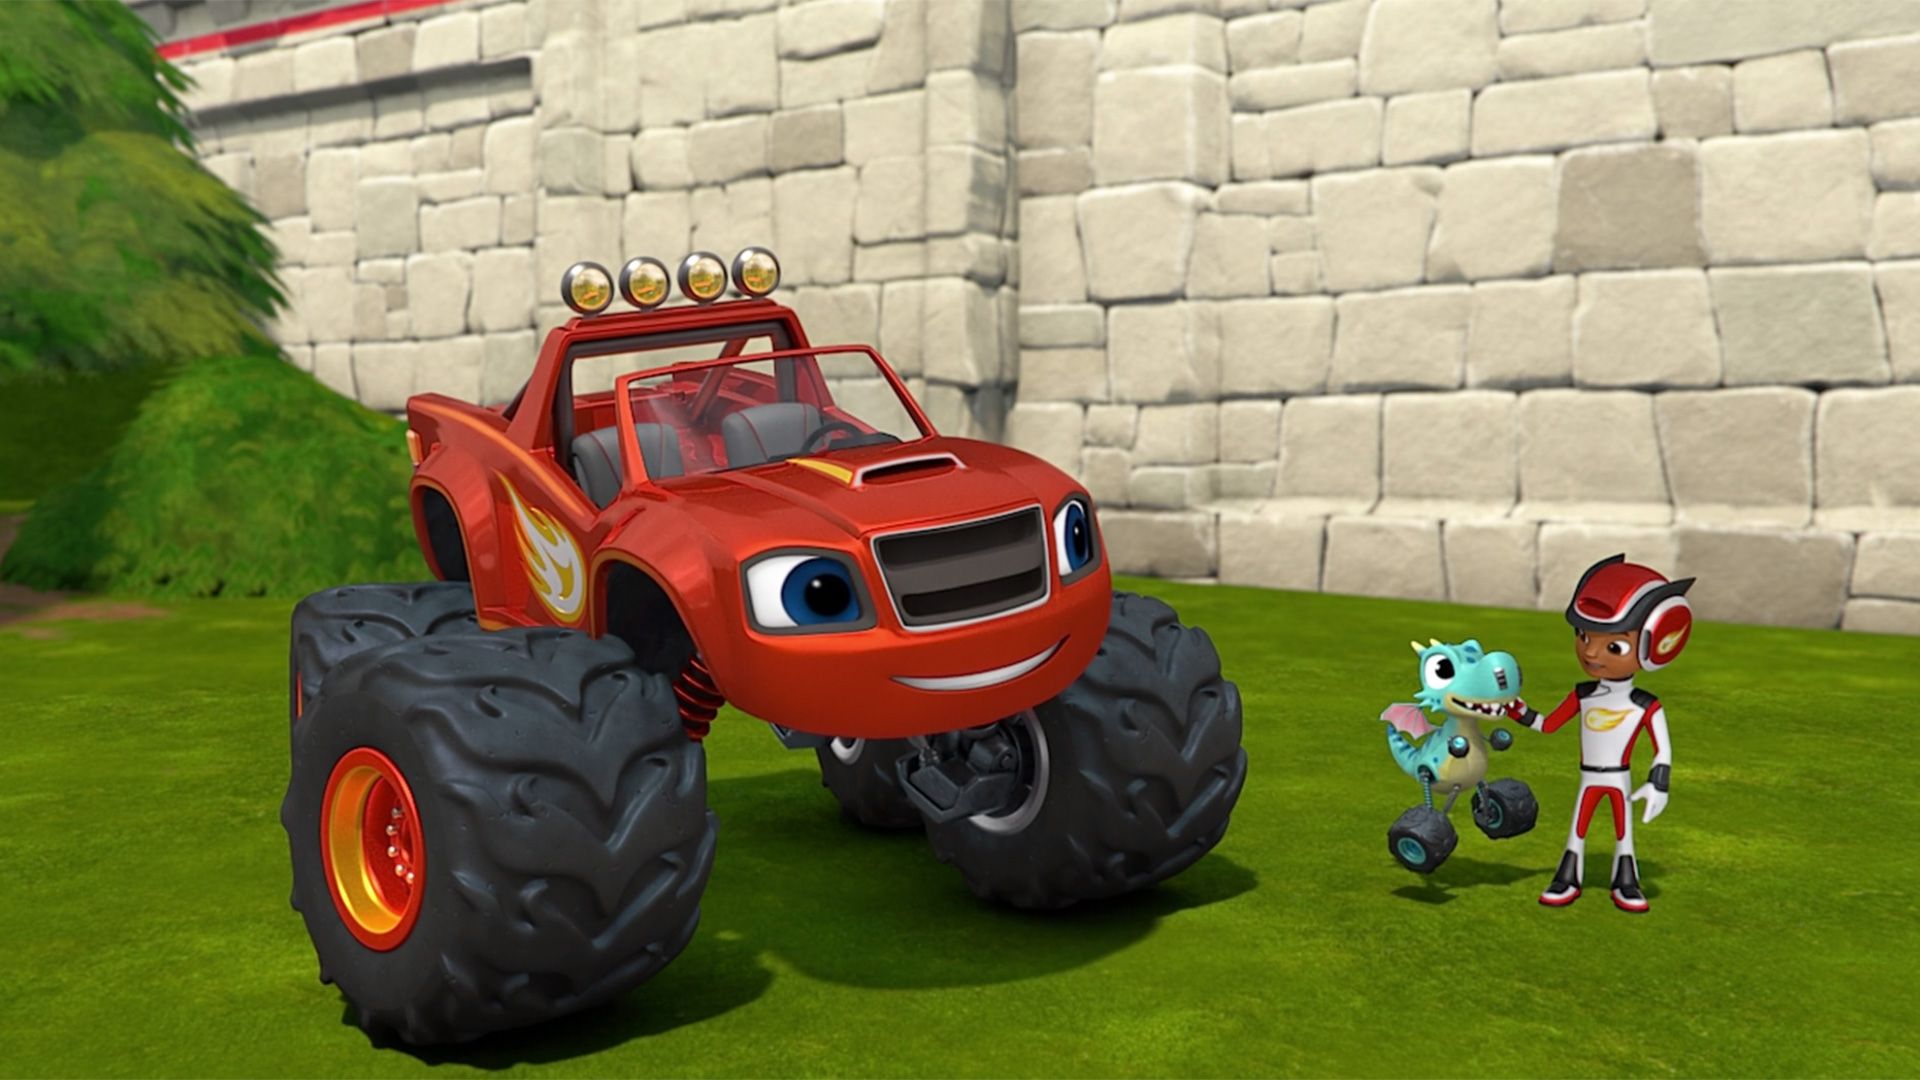 Blaze And The Monster Machines Full Episodes, Royal